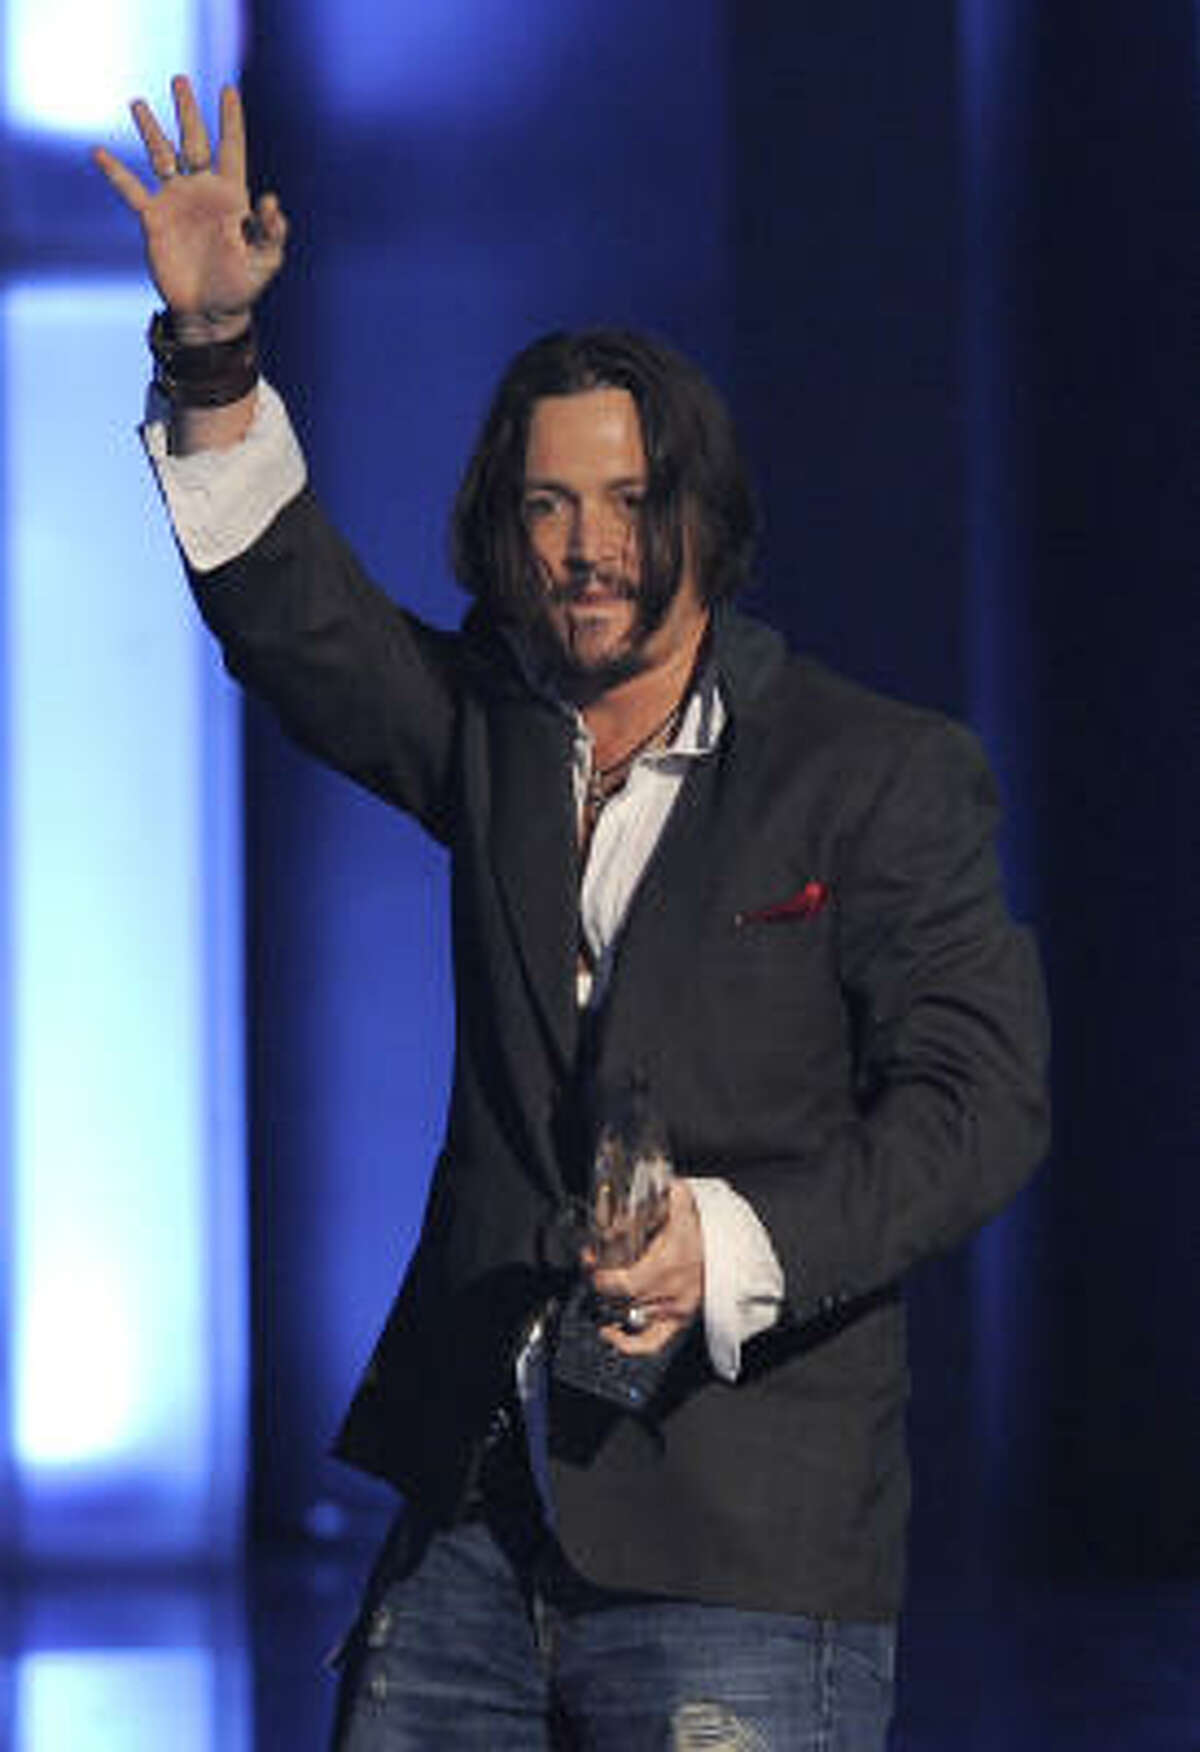 Johnny Depp accepts the award for favorite movie actor of the decade arteyett the People's Choice Awards on Wednesday Jan. 6, 2010, in Los Angeles.